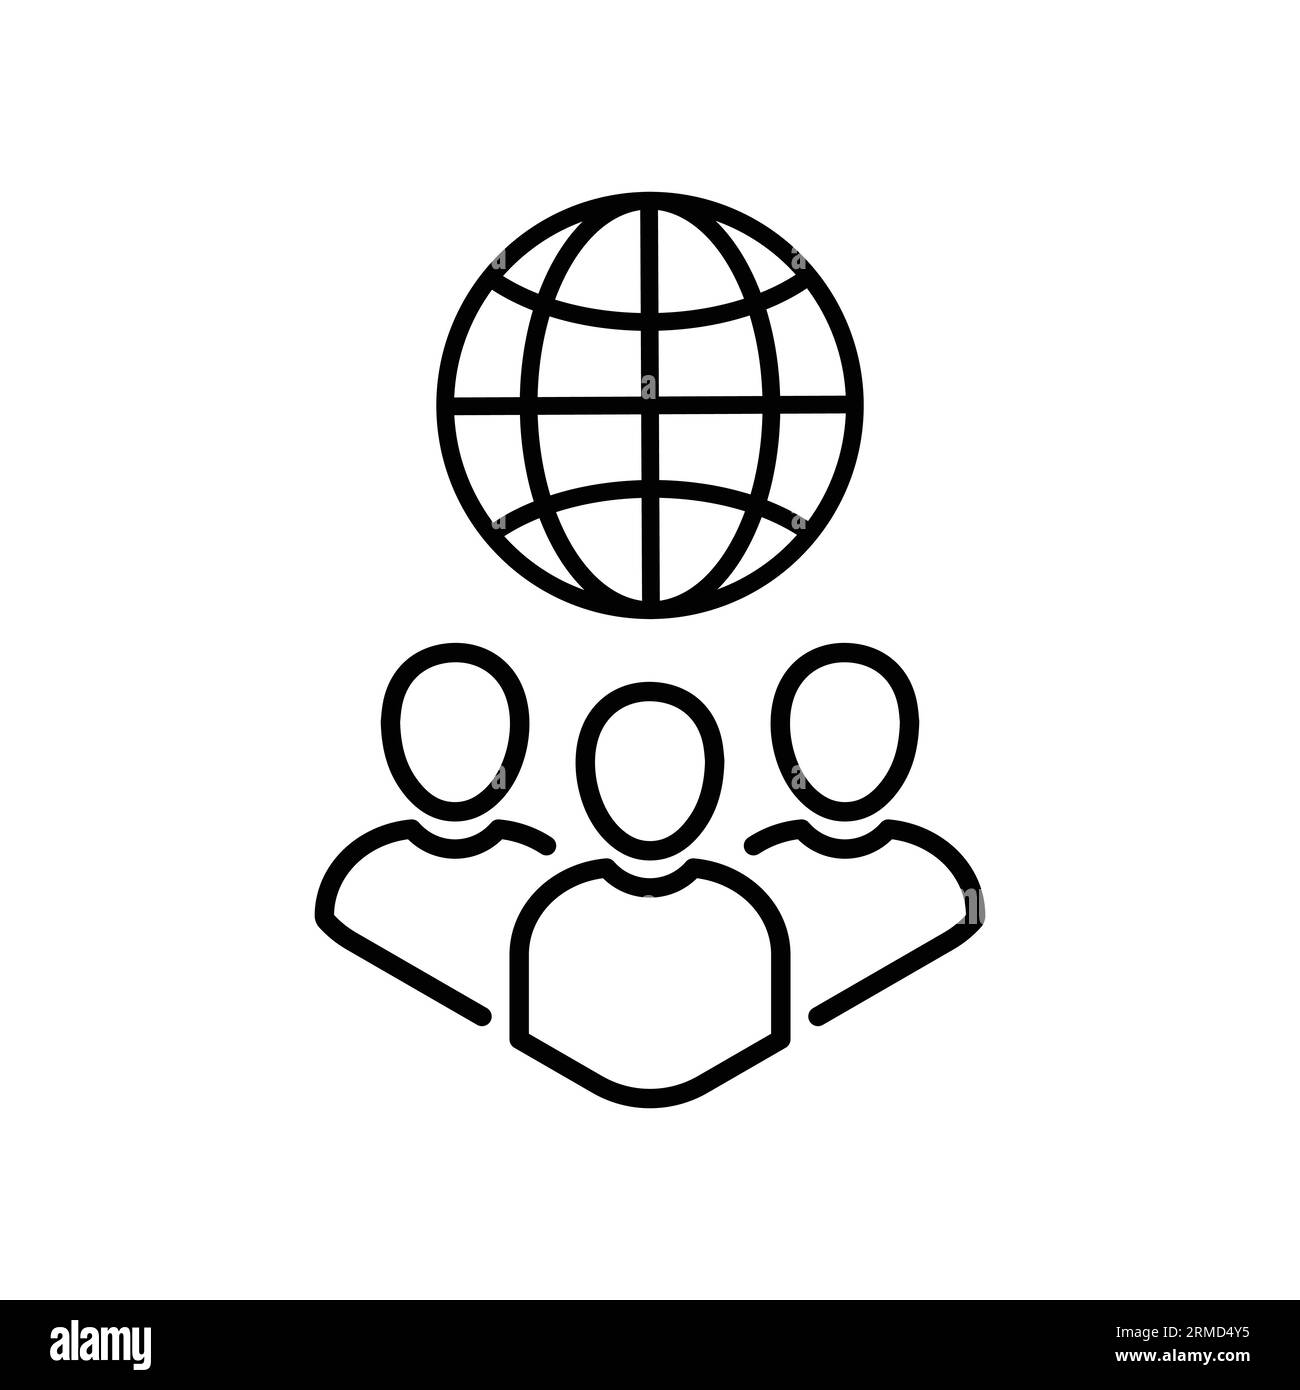 thin line global governance icon like people with globe. lineart trend modern logotype graphic stroke art design element isolated on white background. Stock Vector